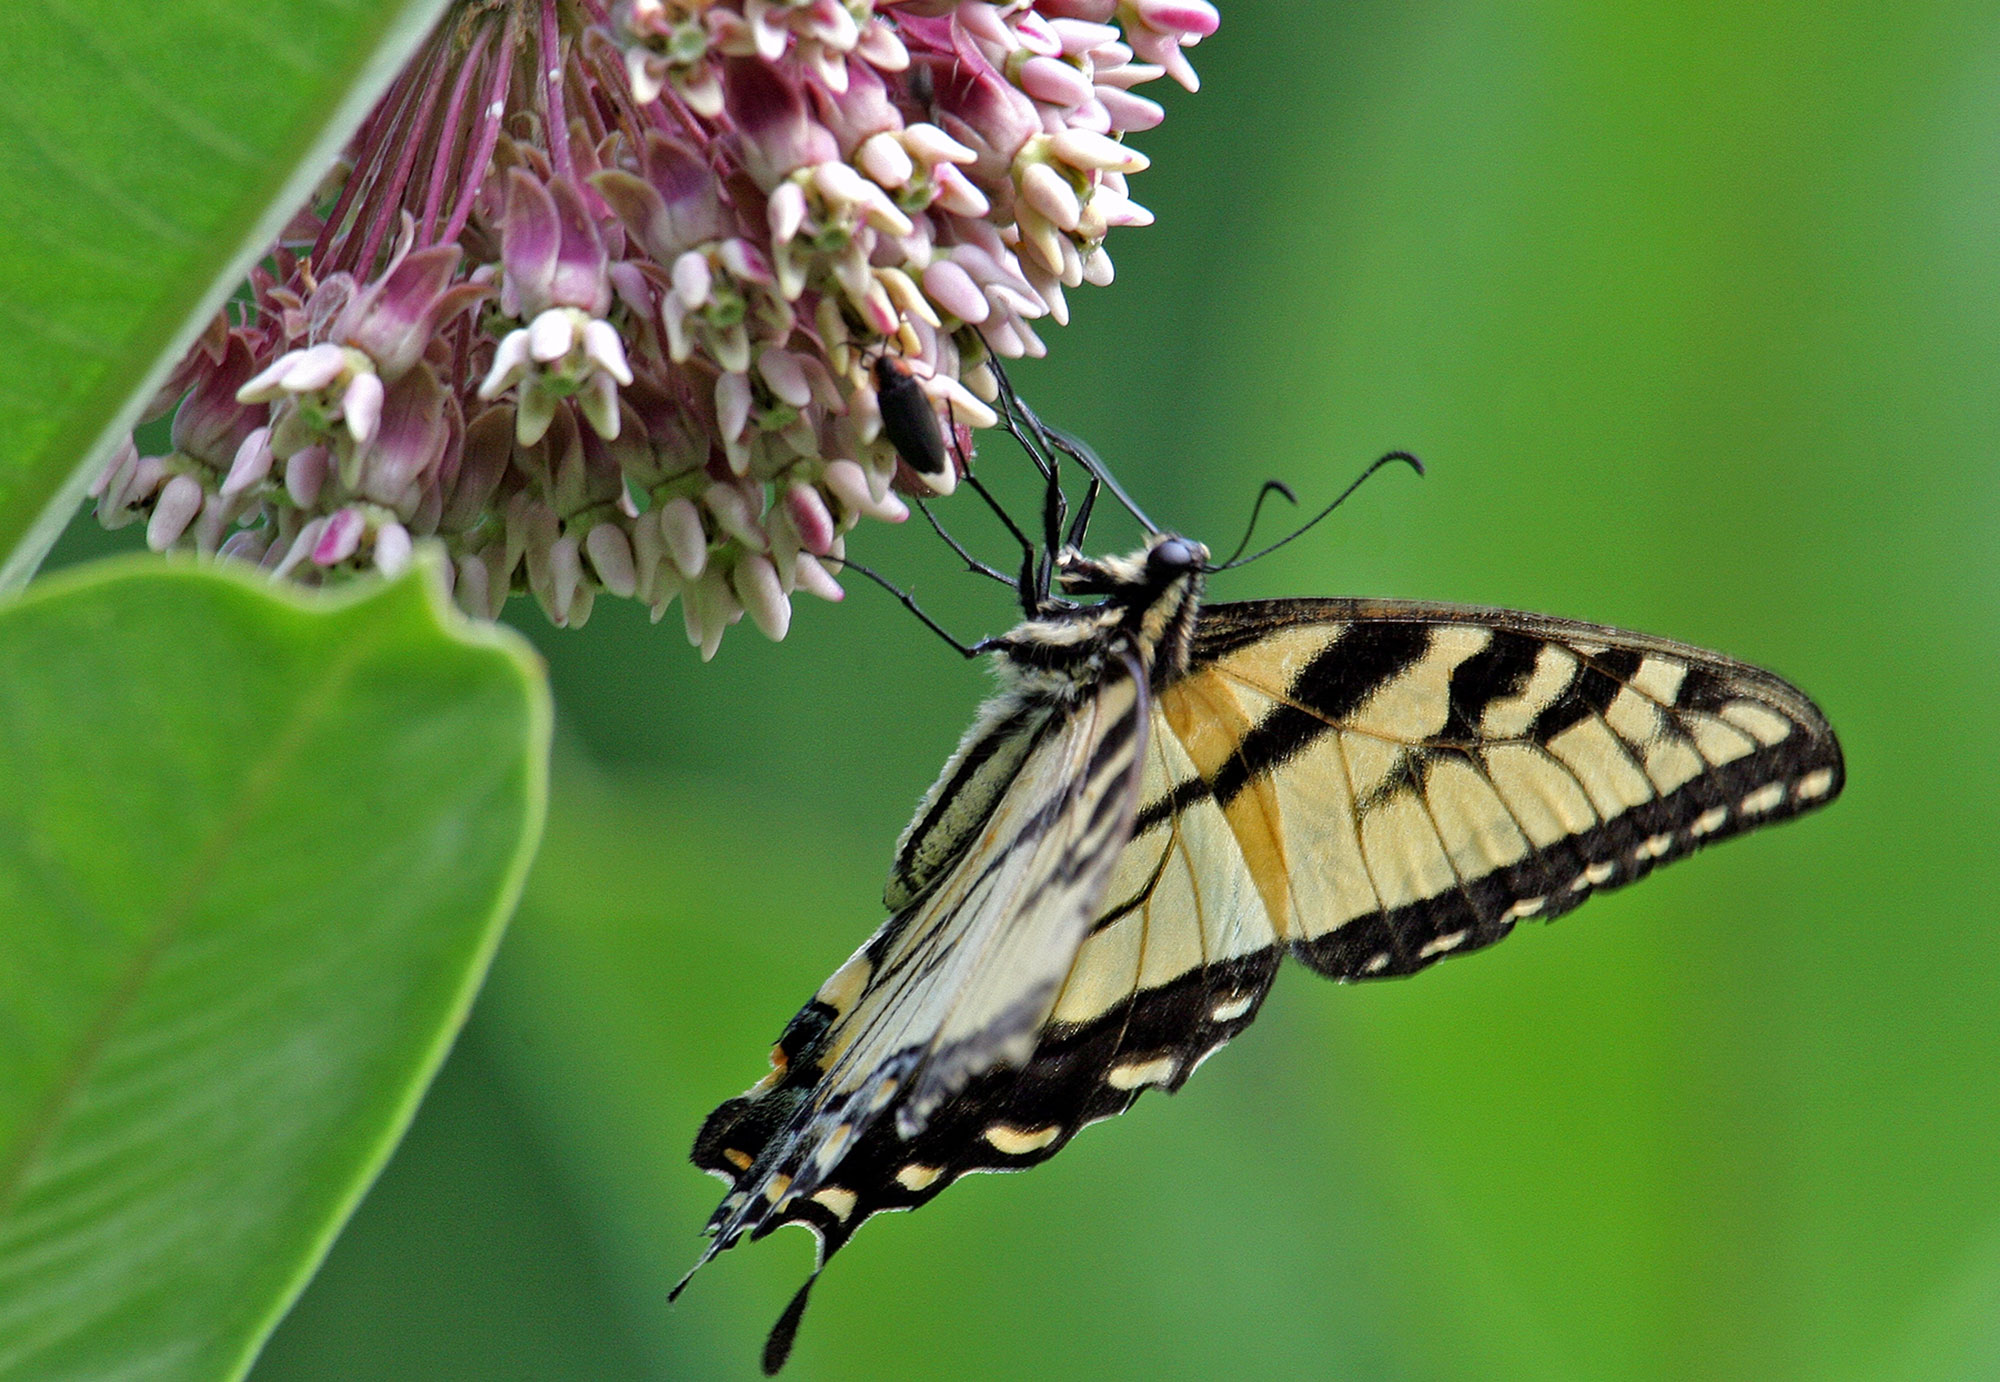 A tiger swallowtail butterfly sipping nectar from milkweed.